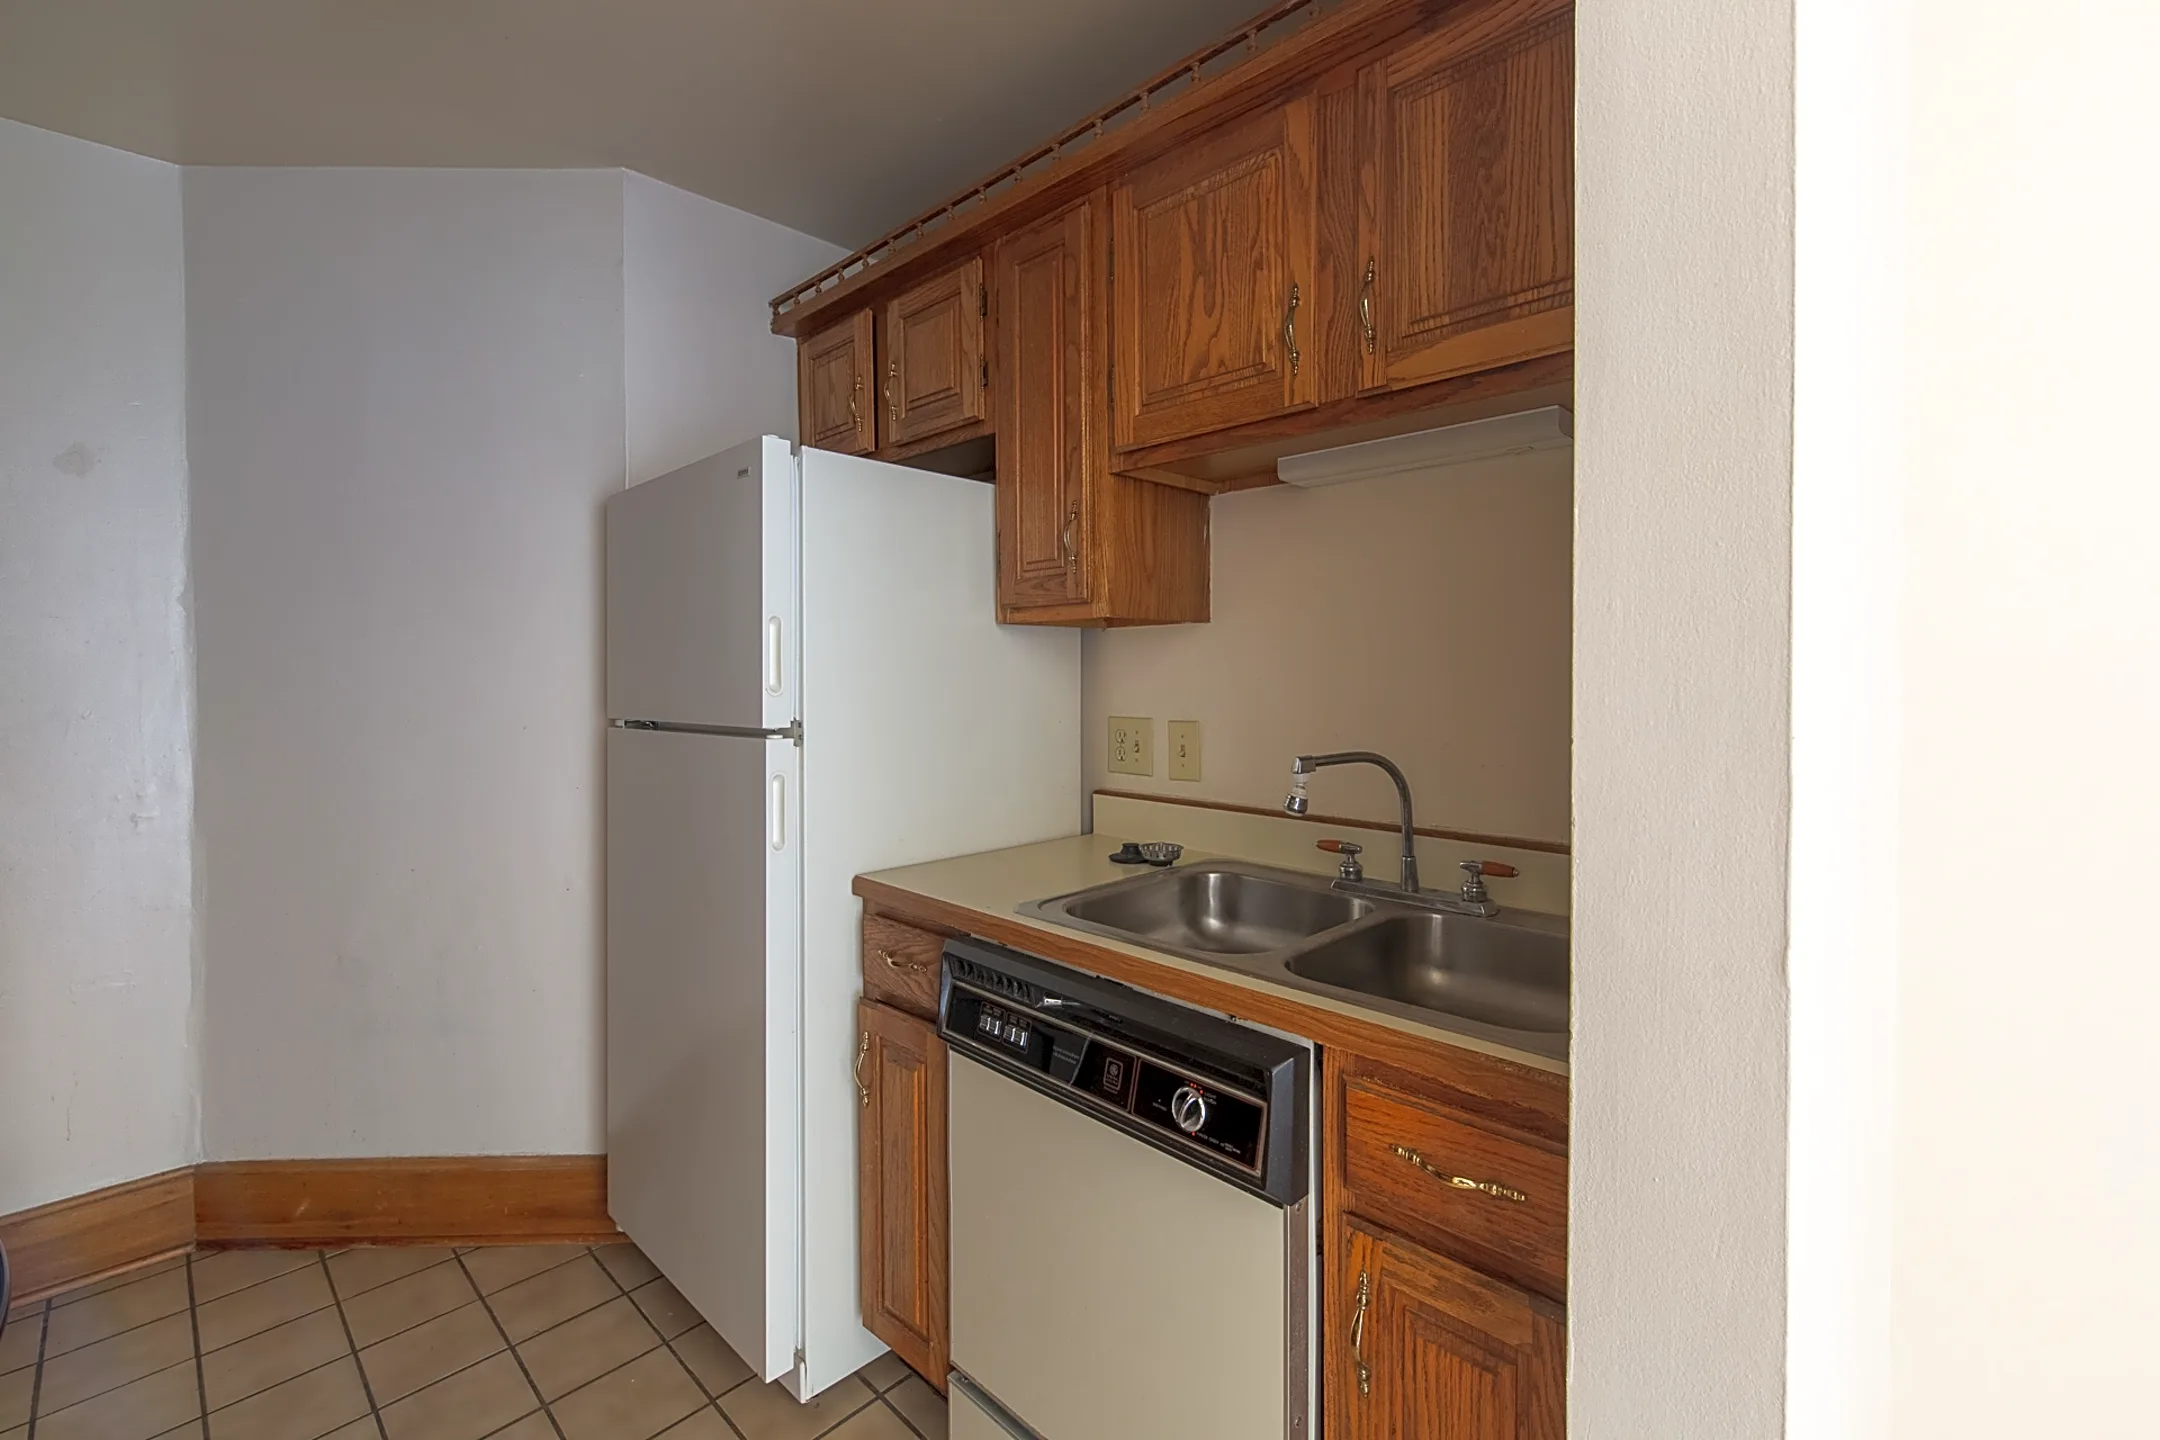 Kitchen - InTempus Property Management - Indianapolis, IN